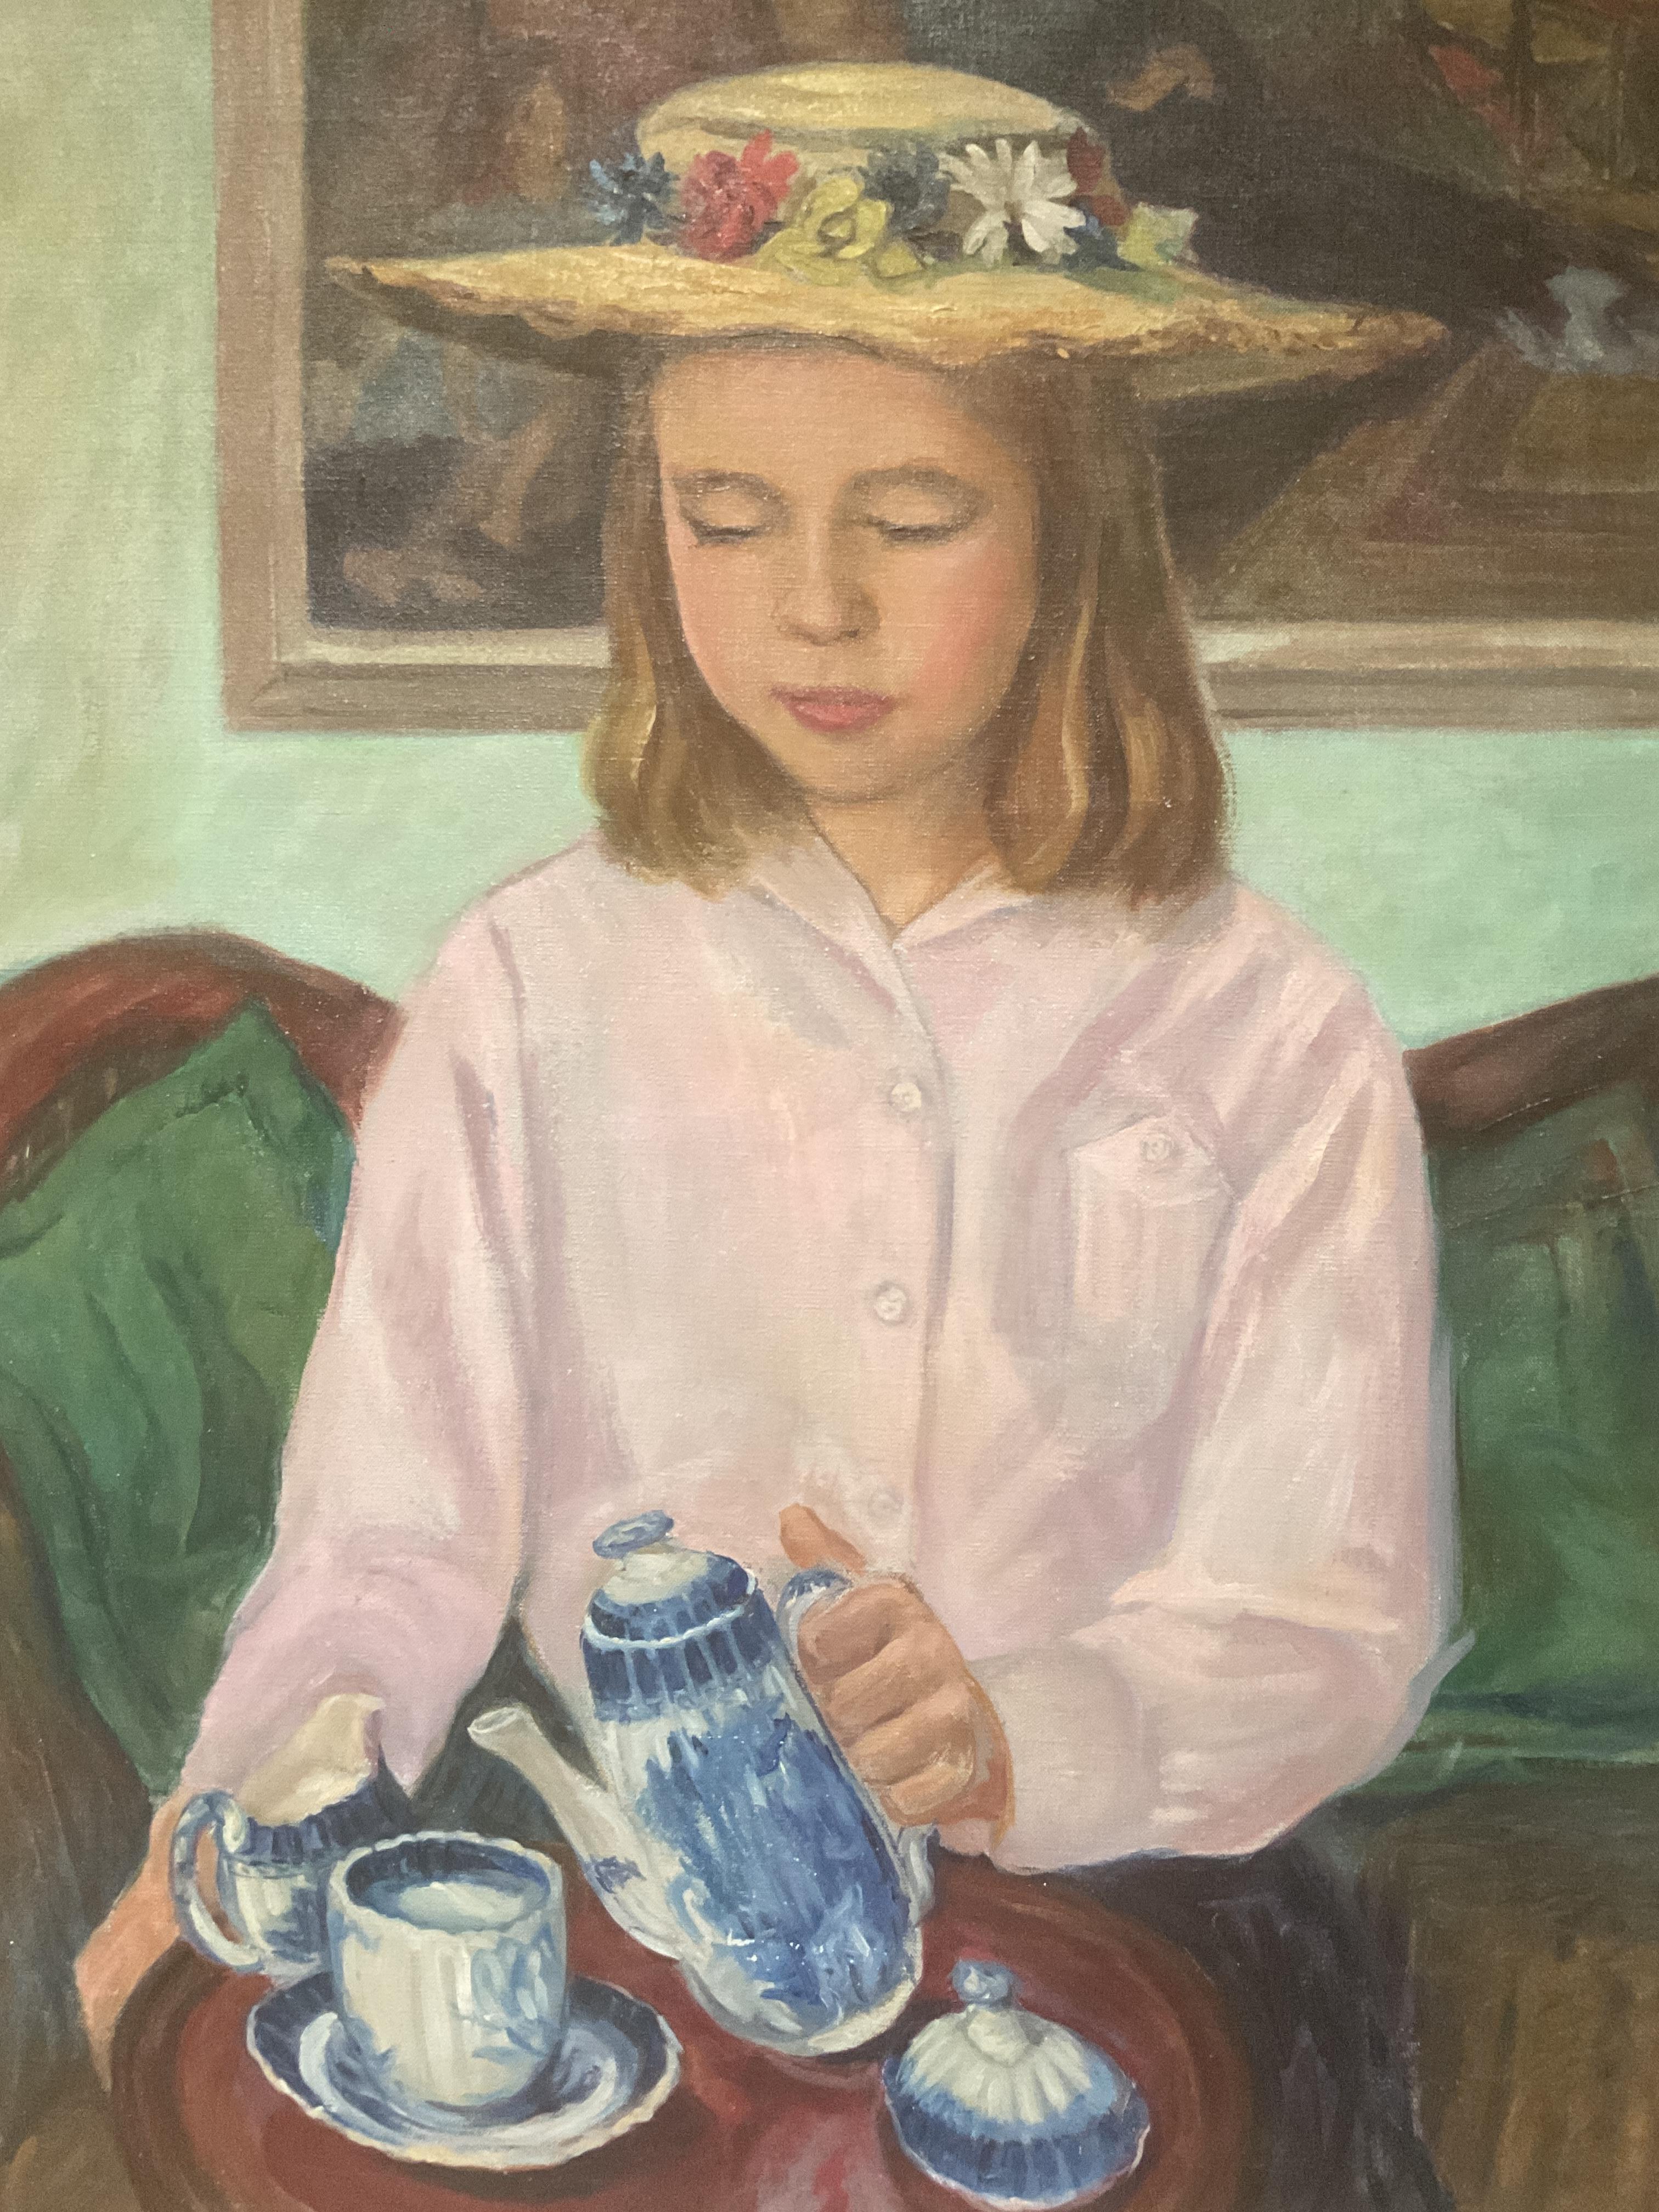 This is not your typical child’s portrait. Young Ellen Warfield is steadily pouring tea or coffee in a proper manner that certainly conforms to societal expectations of the 1950’s. 

The oil on canvas portrait is identified on the reverse as to the